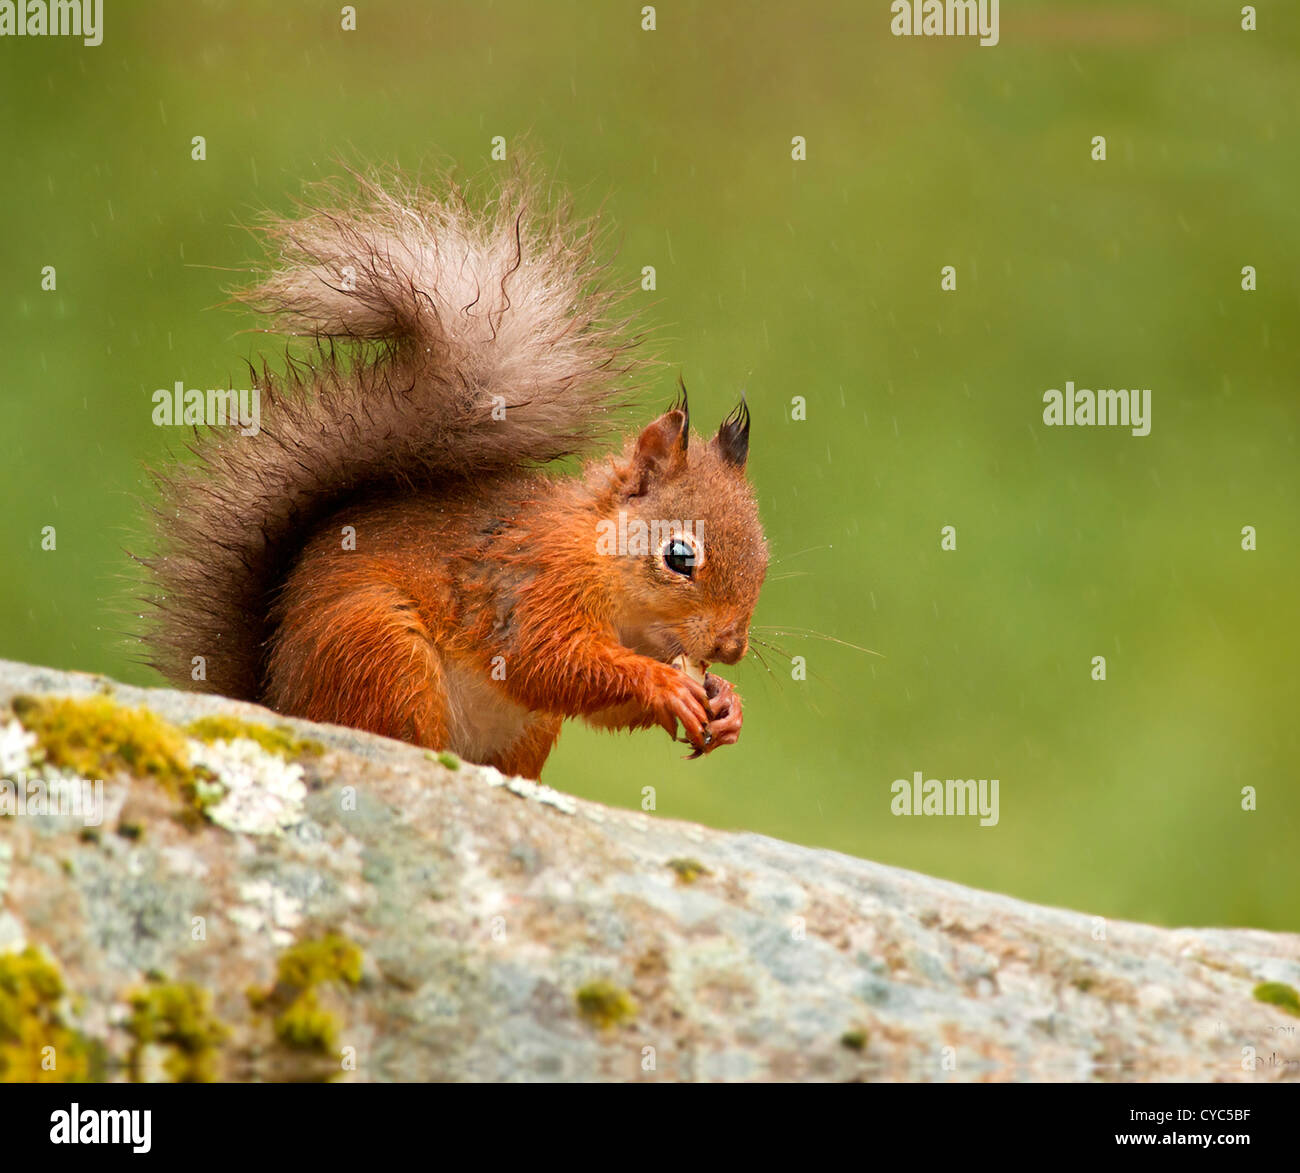 A red squirrel in the rain eating peanuts Stock Photo